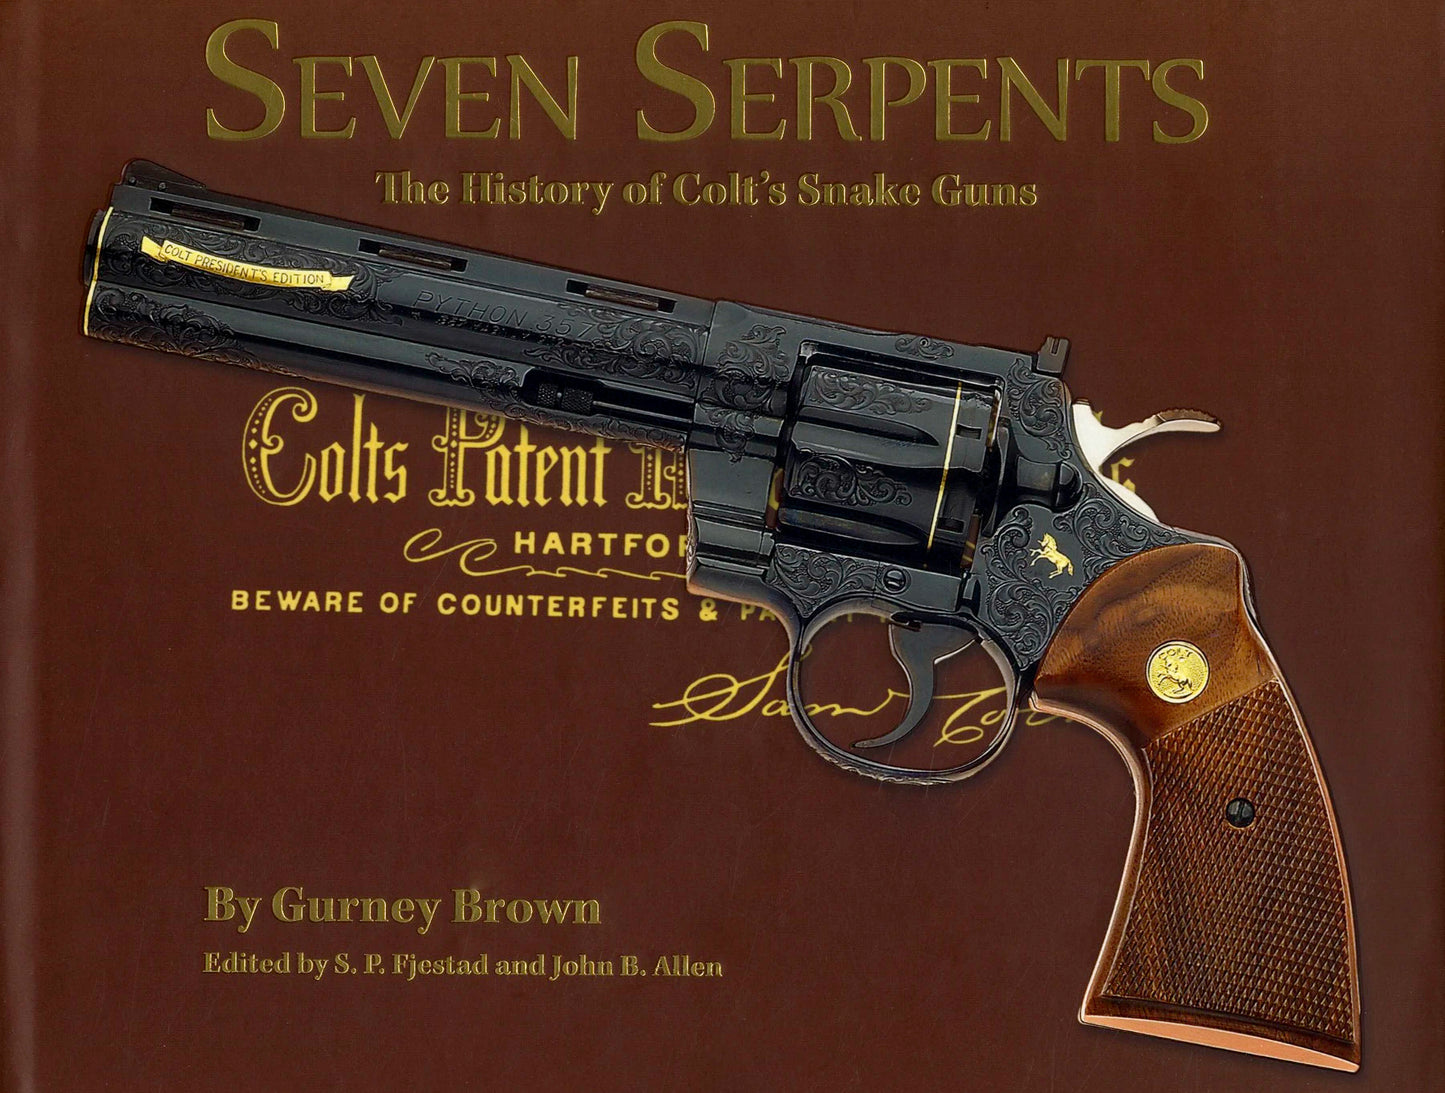 TWO BOOKS: Seven Serpents: Colt's Snake Guns AND Colt's Python: King of the Seven Serpents by Gurney Brown